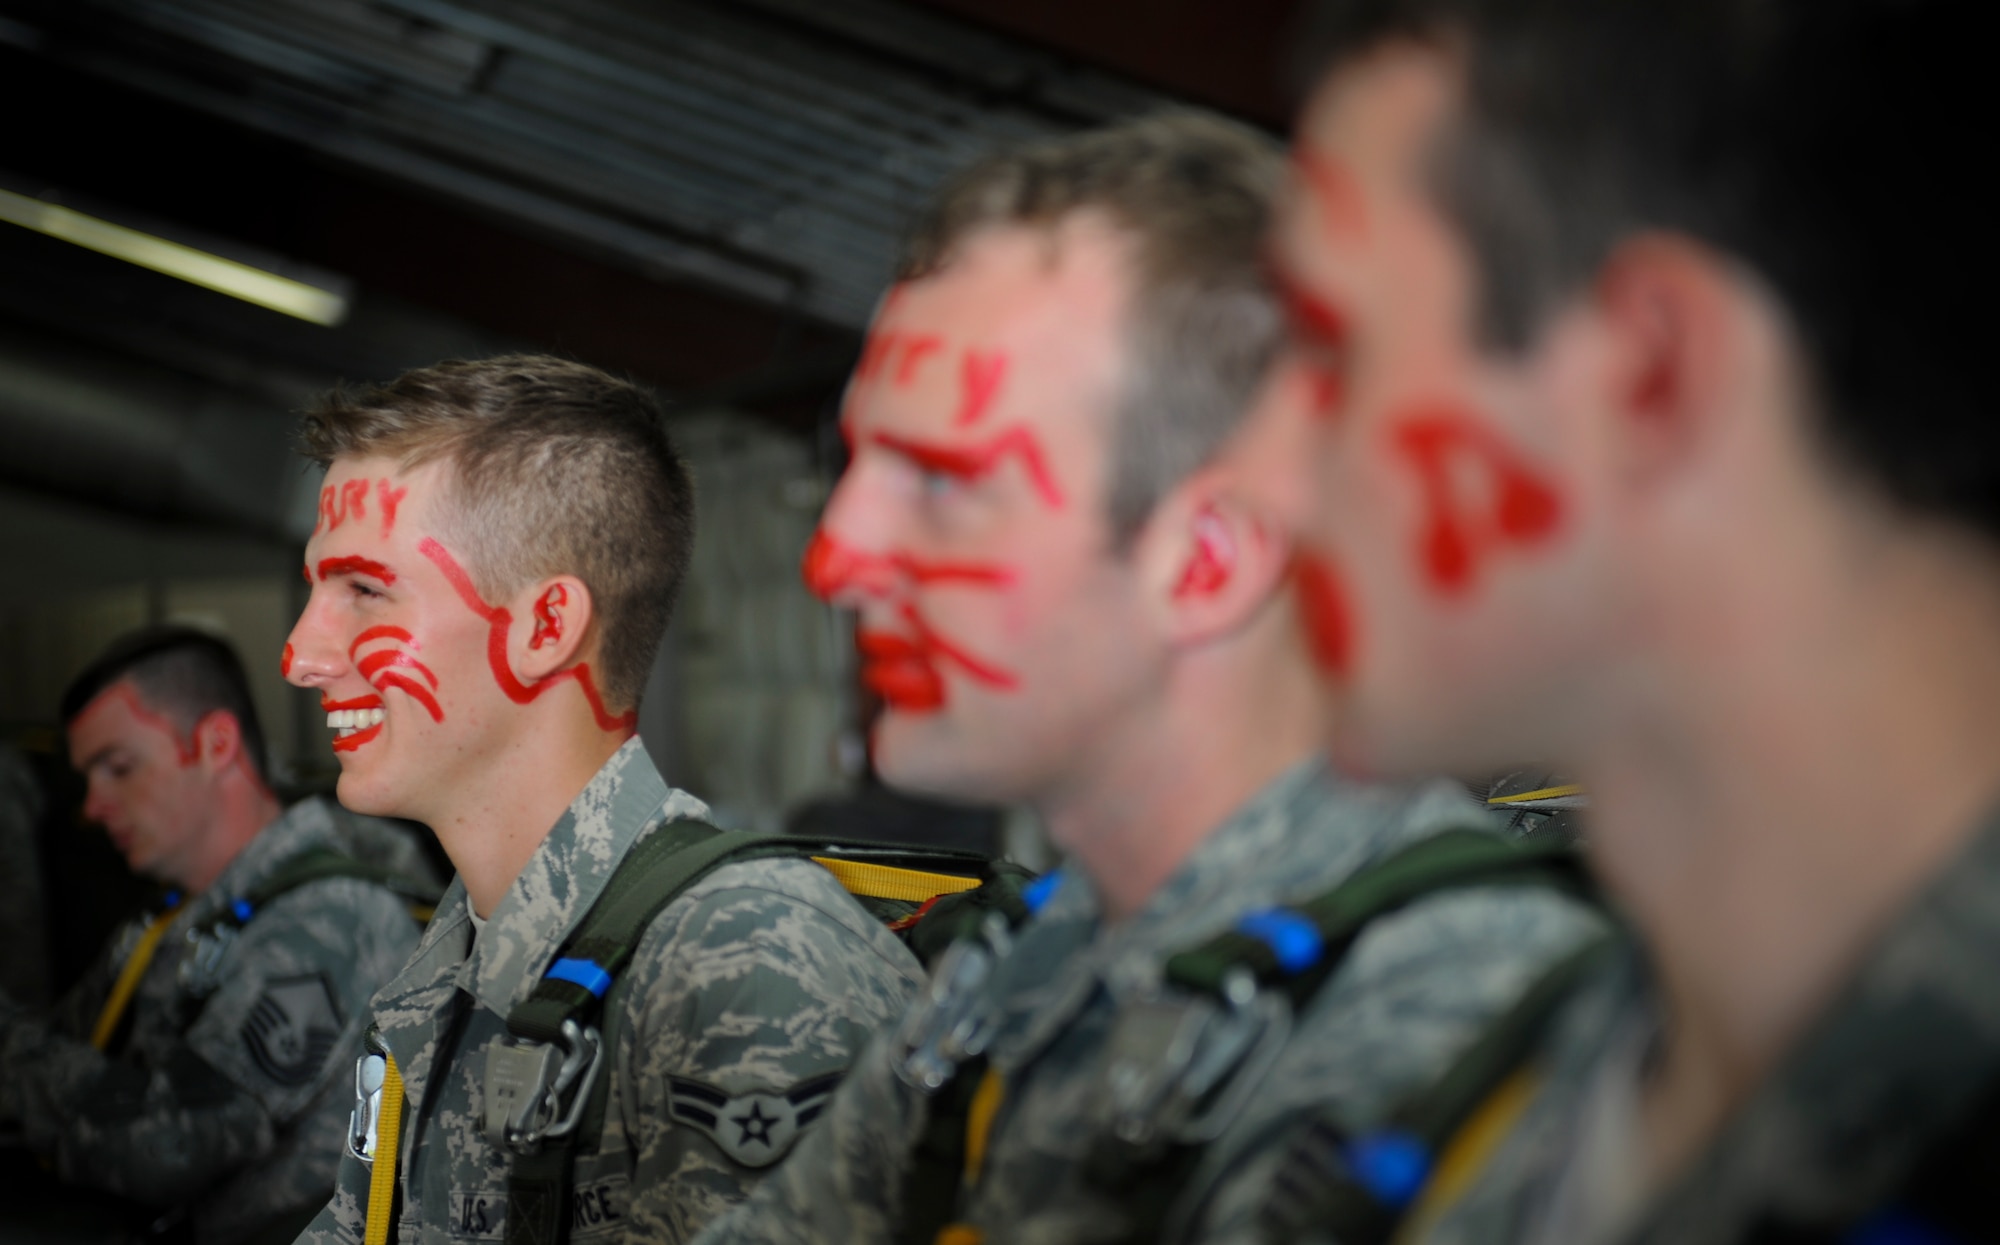 U.S. Air Force Airman 1st Class Fedor Potanin, 823d Base Defense Squadron fireteam member, laughs as he stands beside other first-time jumpers at Moody Air Force Base, Ga., March 21, 2012. First-time jumpers of the 820th Base Defense Group receive face paint to signify their first jump after completing the U.S. Army Basic Airborne Course. (U.S. Air Force photo by Airman 1st Class Douglas Ellis/Released)
